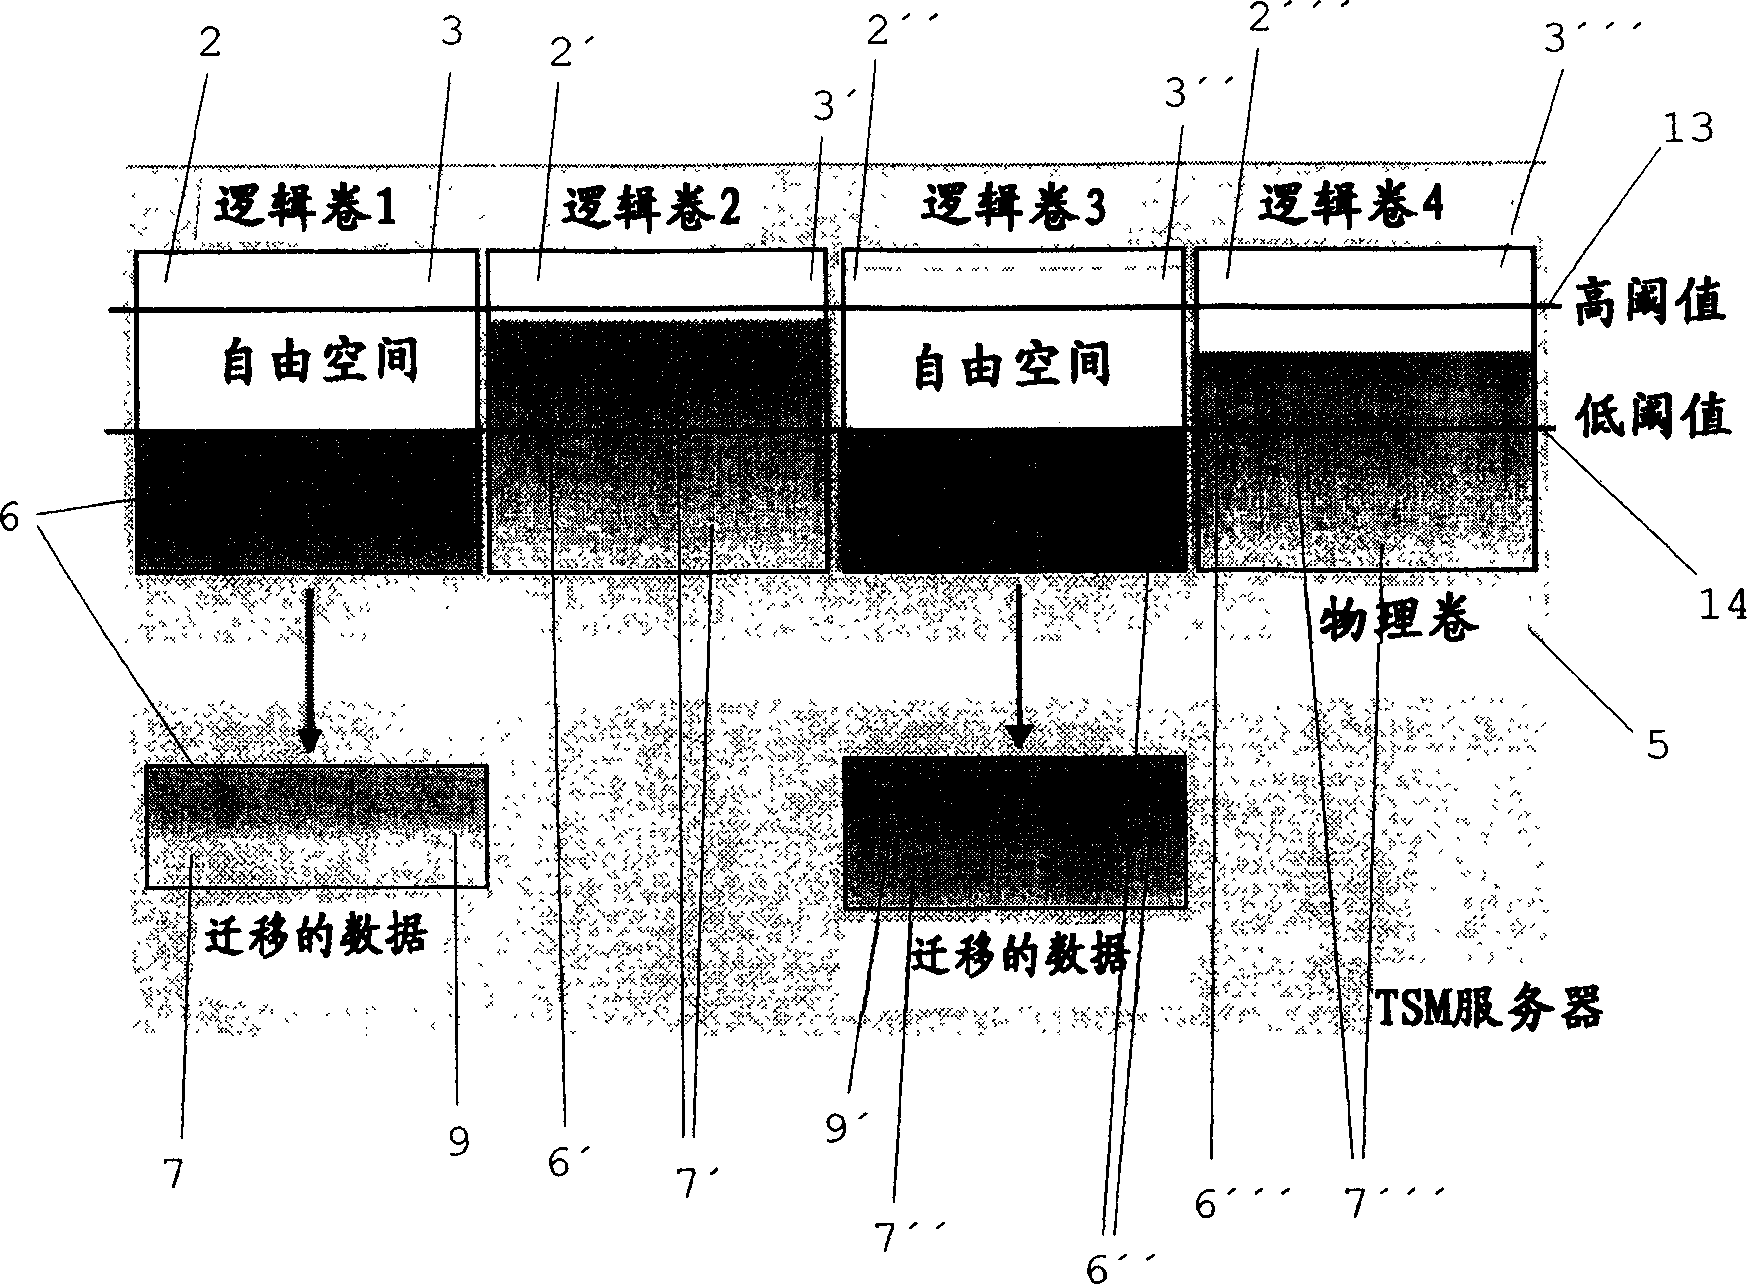 Mass storage device and method for dynamically managing a mass storage device